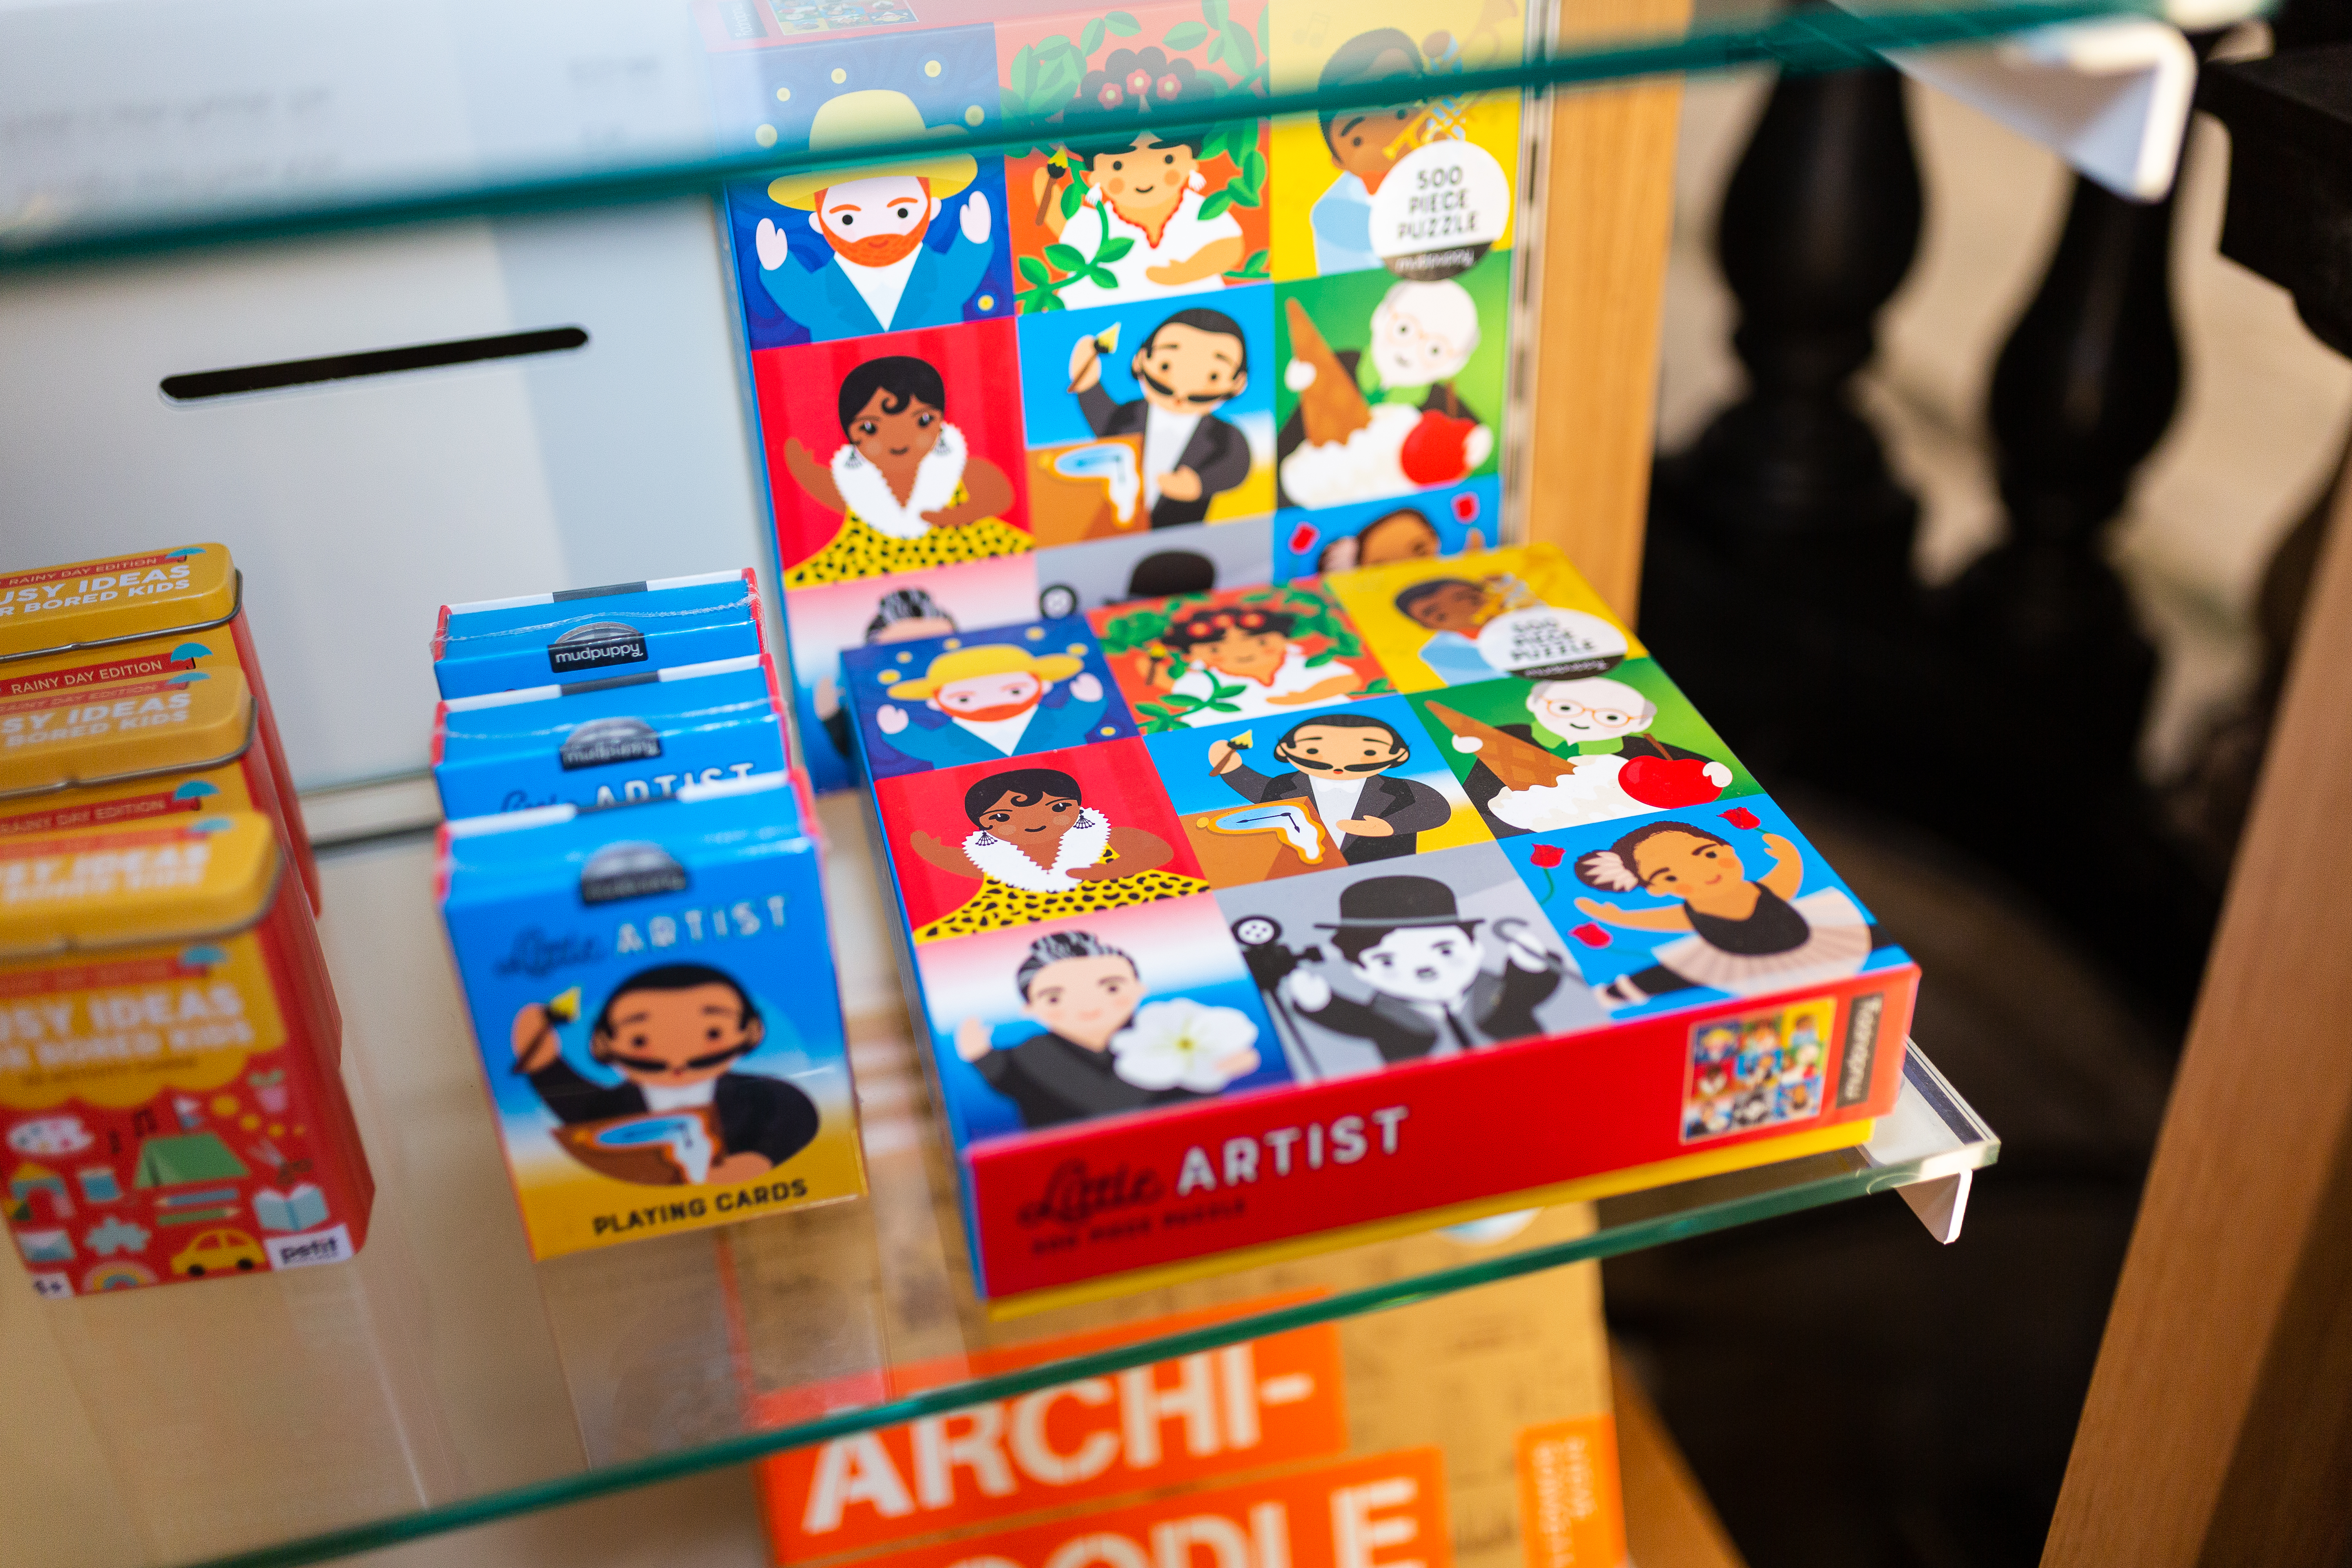 An image showing a children's card game 